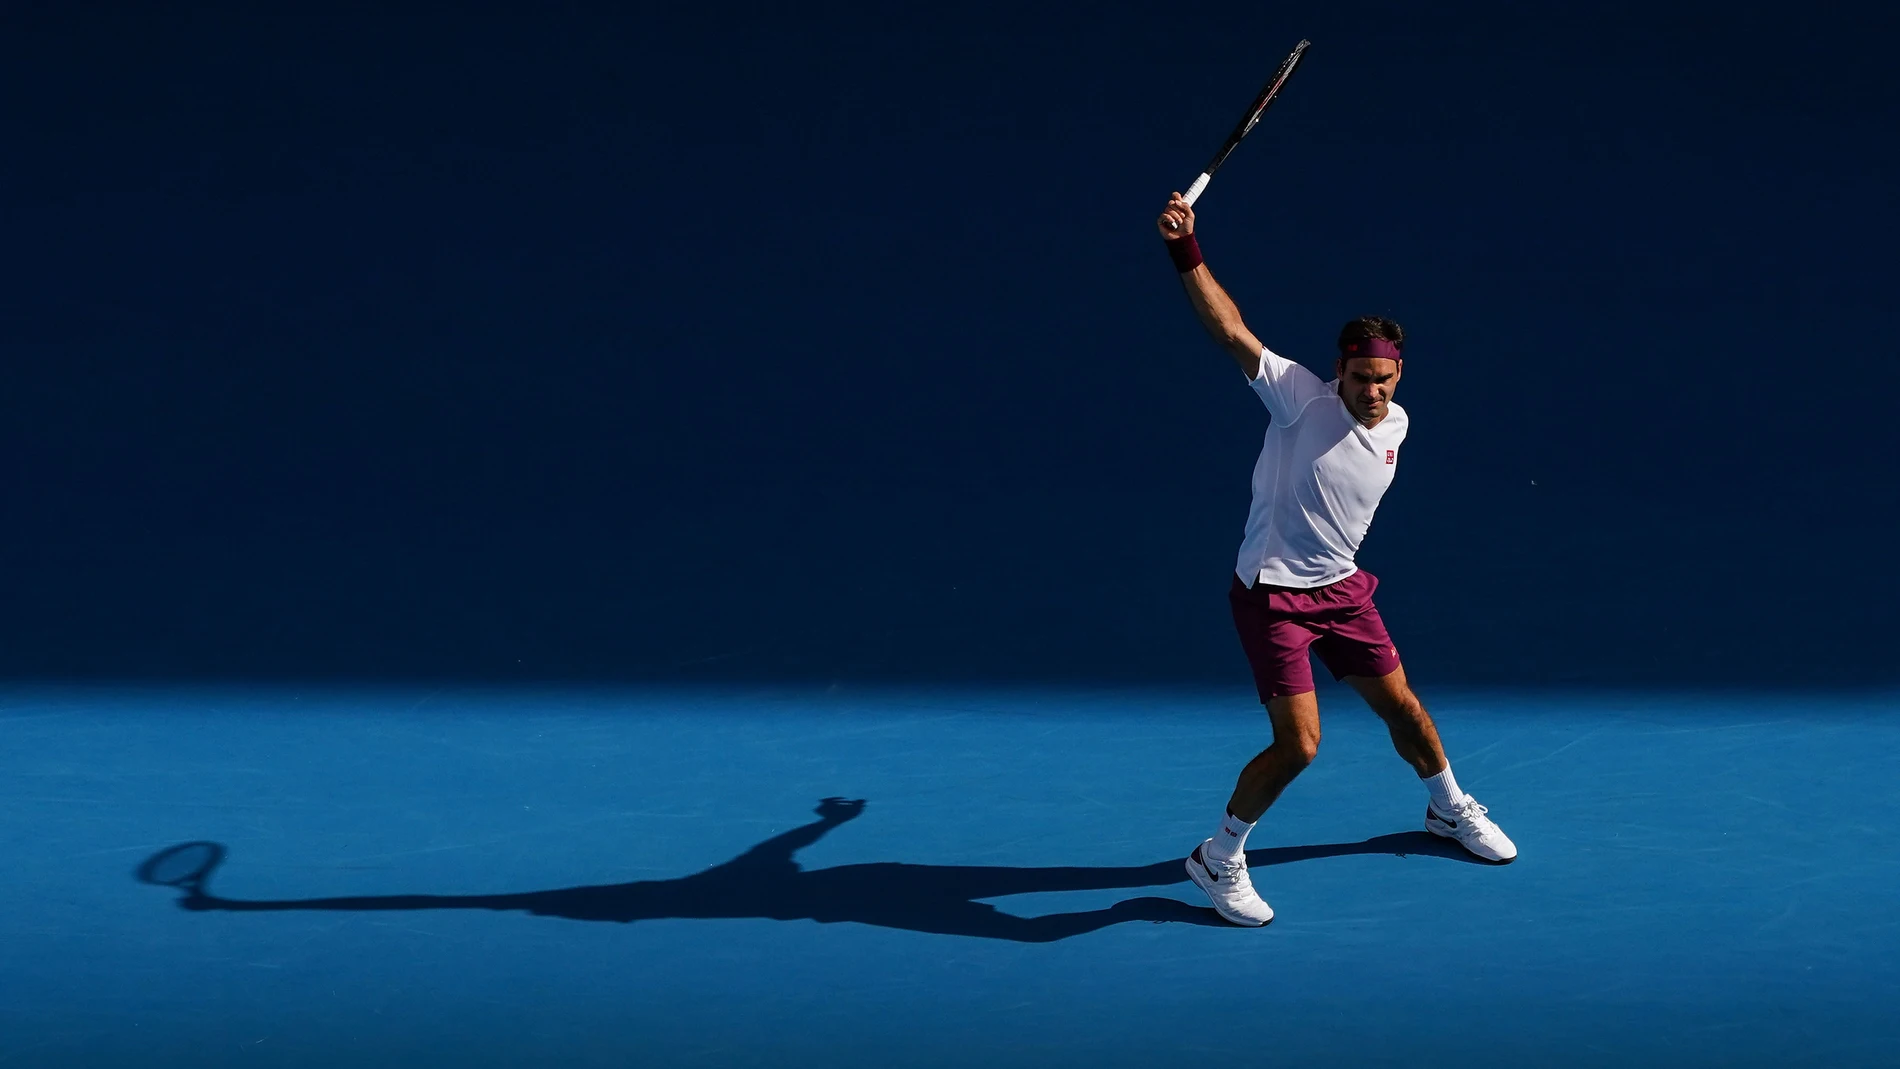 Roger Federer of Switzerland plays a shot during his fifth round match against Tennys Sandgren of the USA on day nine of the Australian Open tennis tournament at Rod Laver Arena in Melbourne, Tuesday, January 28, 2020. (AAP Image/Scott Barbour) NO ARCHIV